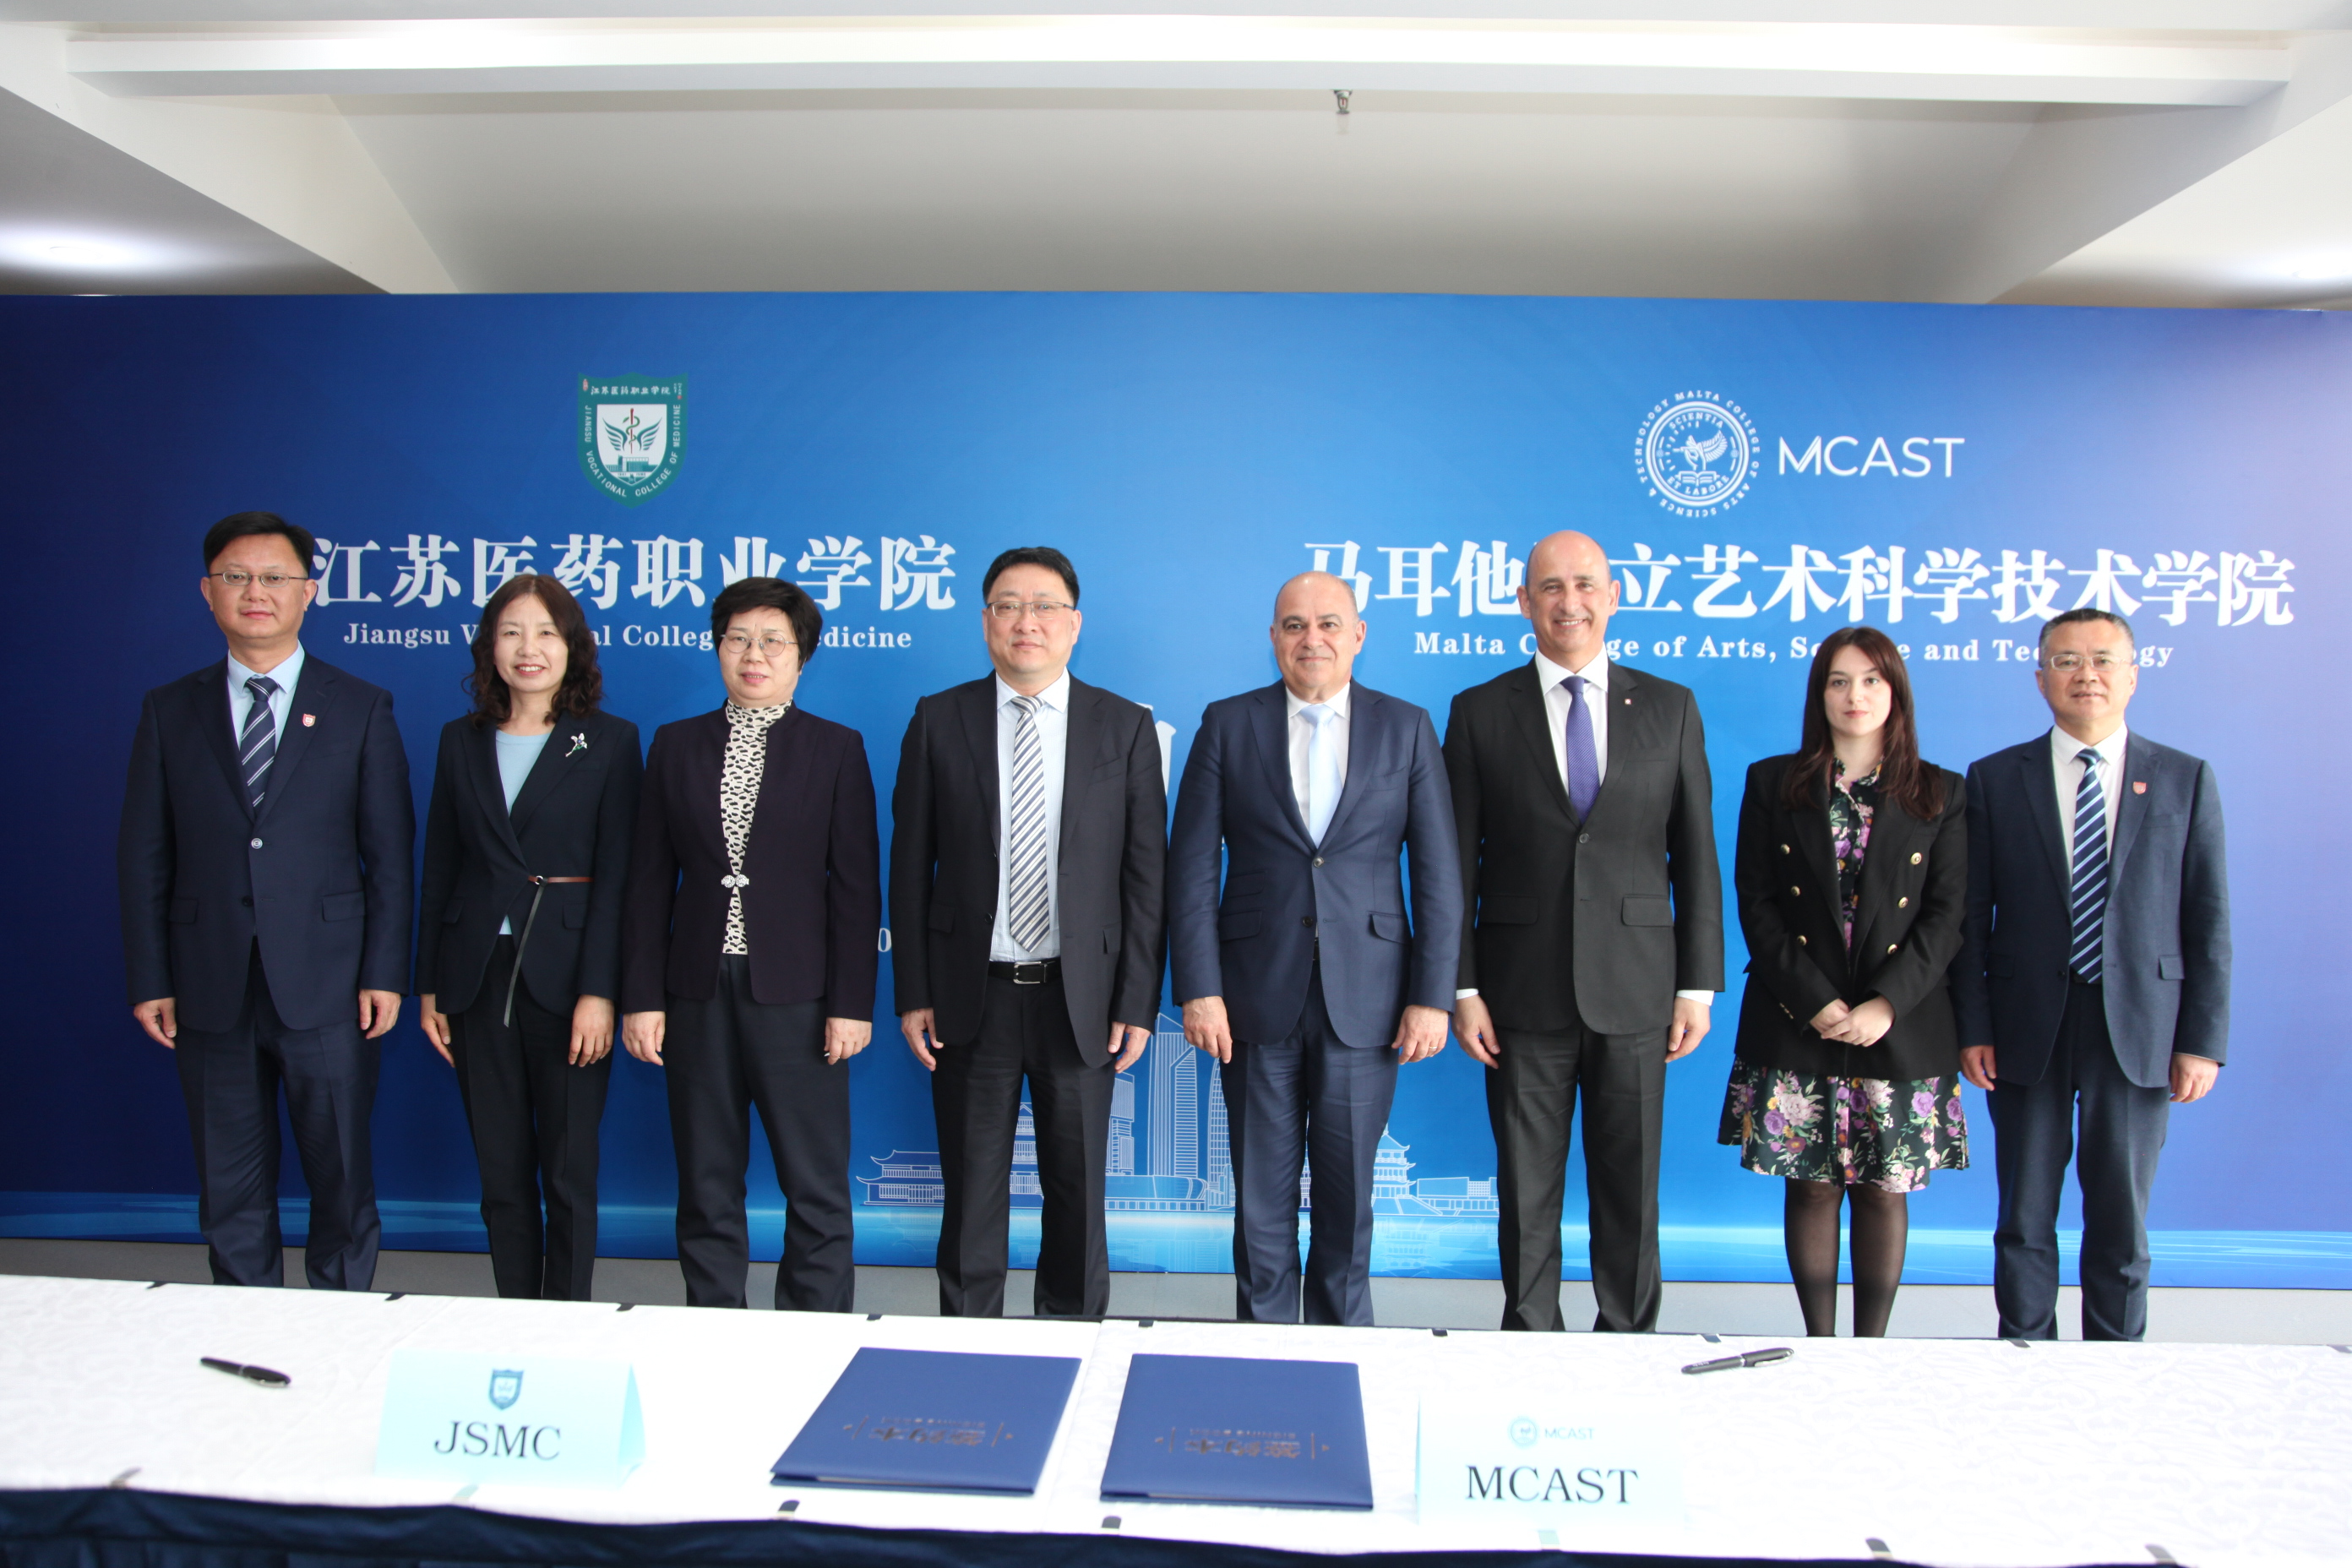 Malta College of Arts, Science and Technology sets up education center in Jiangsu